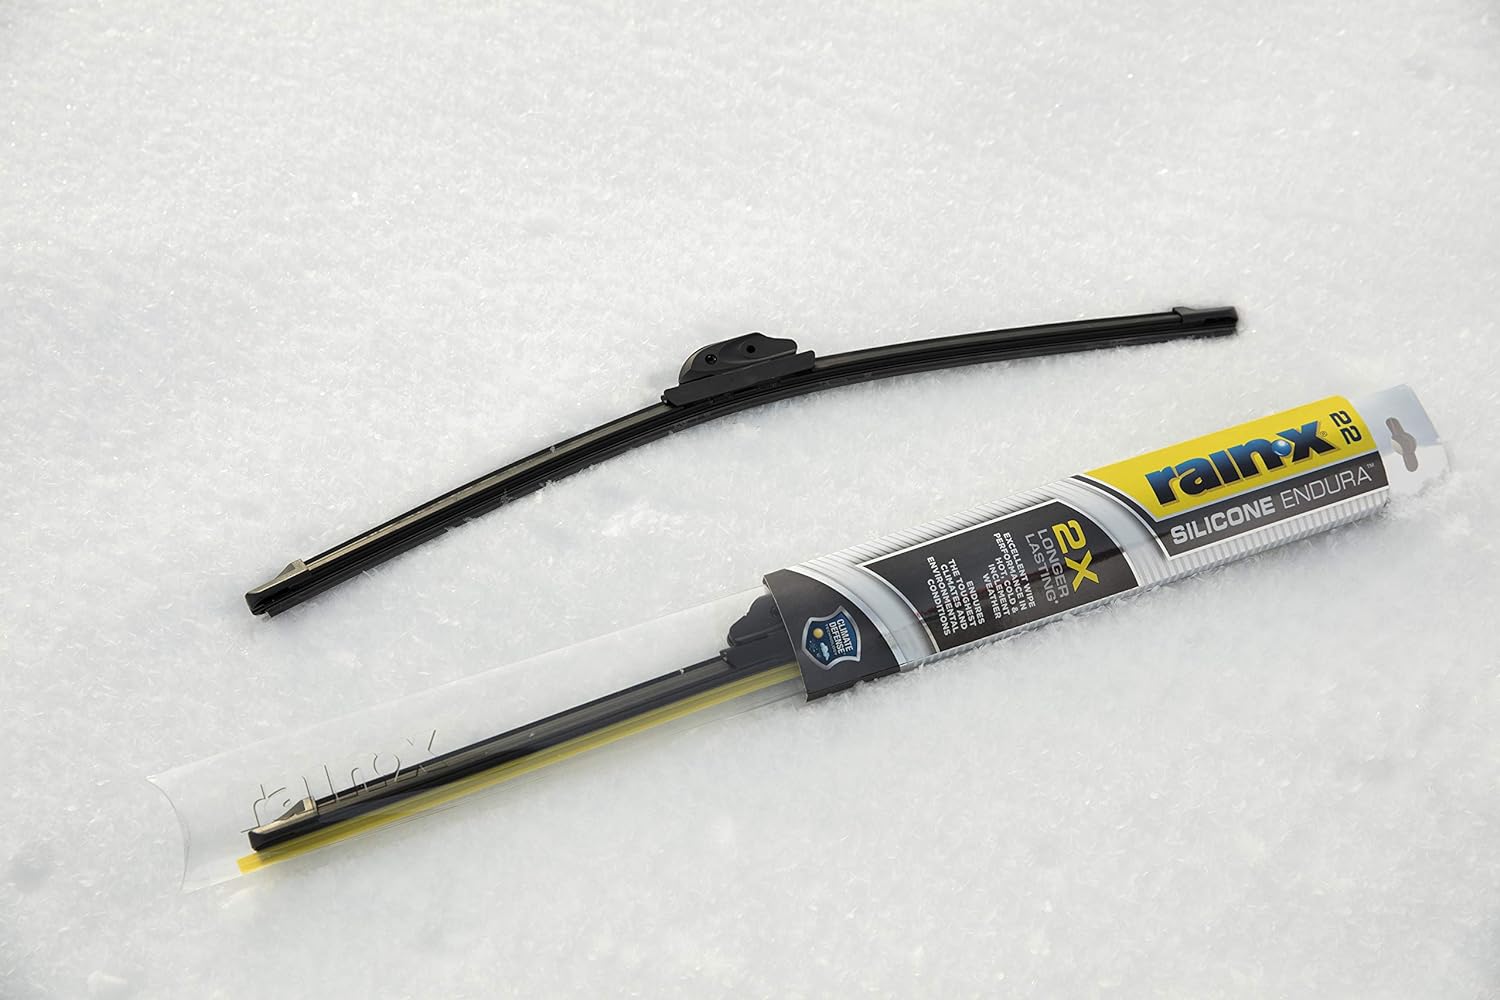 26-Inch Rain-X Silicone Wiper Blades, Automotive Replacement with Longer-Lasting Rubber